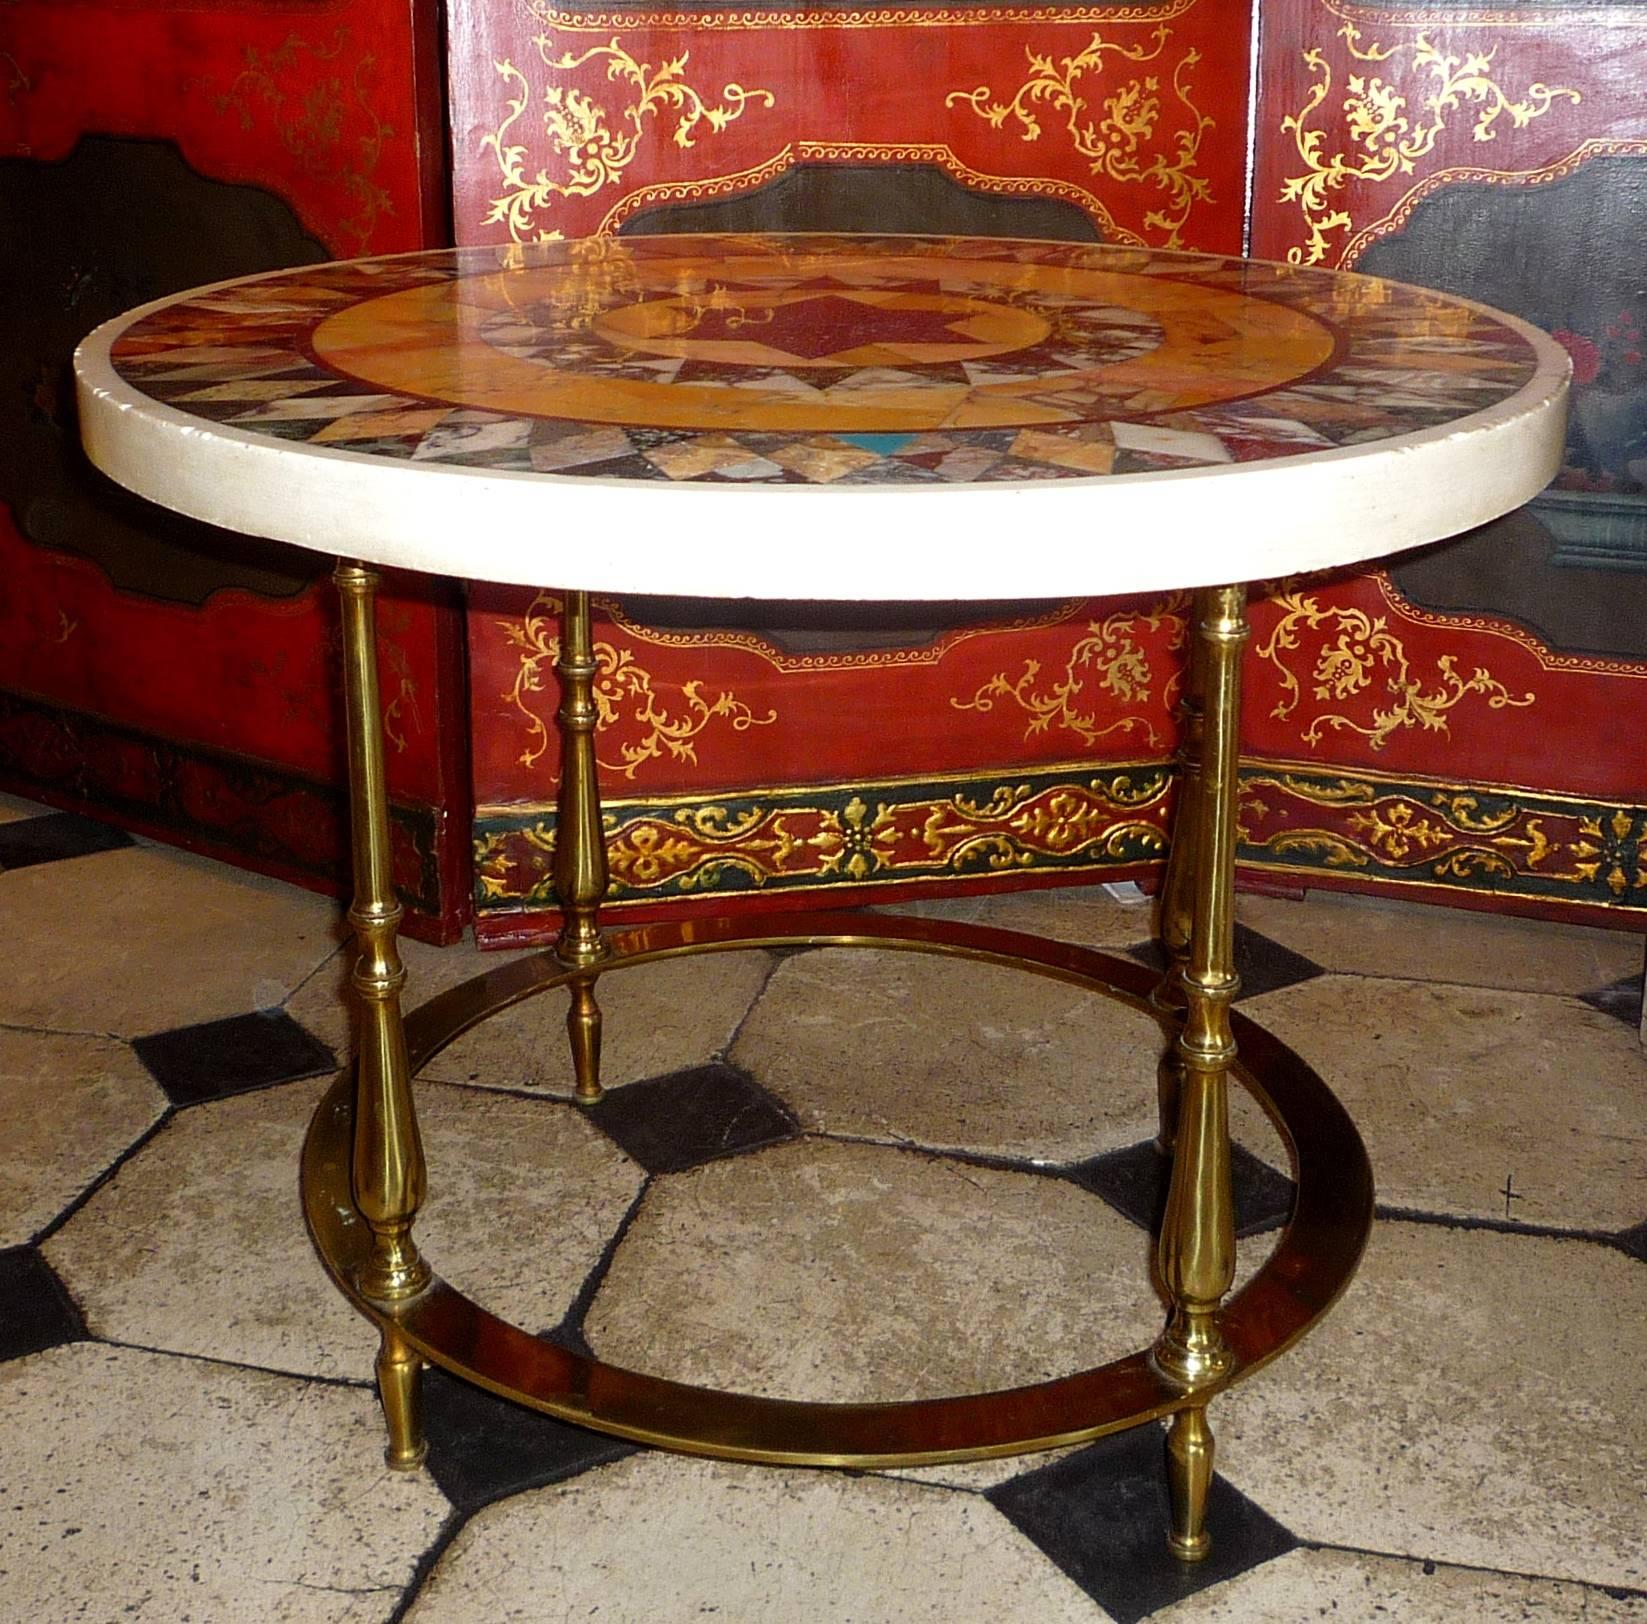 Neoclassical French 1950s Bronze Gueridon with an Italian Marble and Porphyry Circular Top